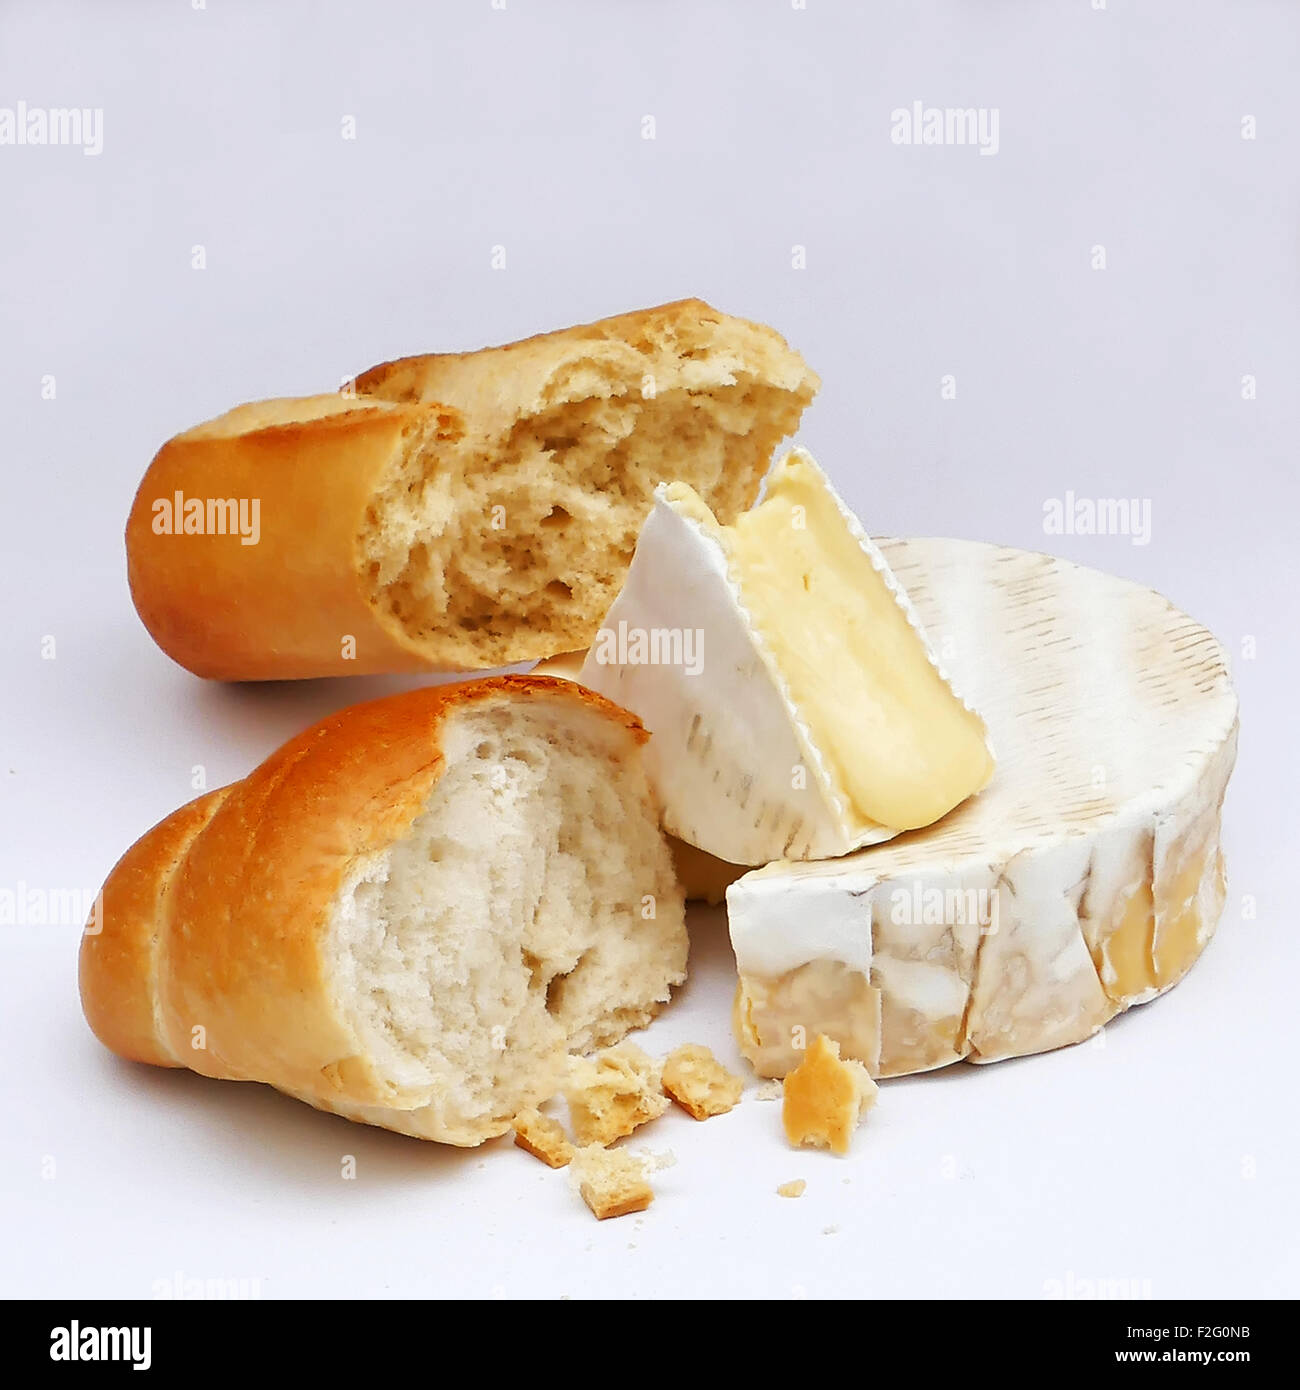 Camembert cheese with chunks of French bread Stock Photo